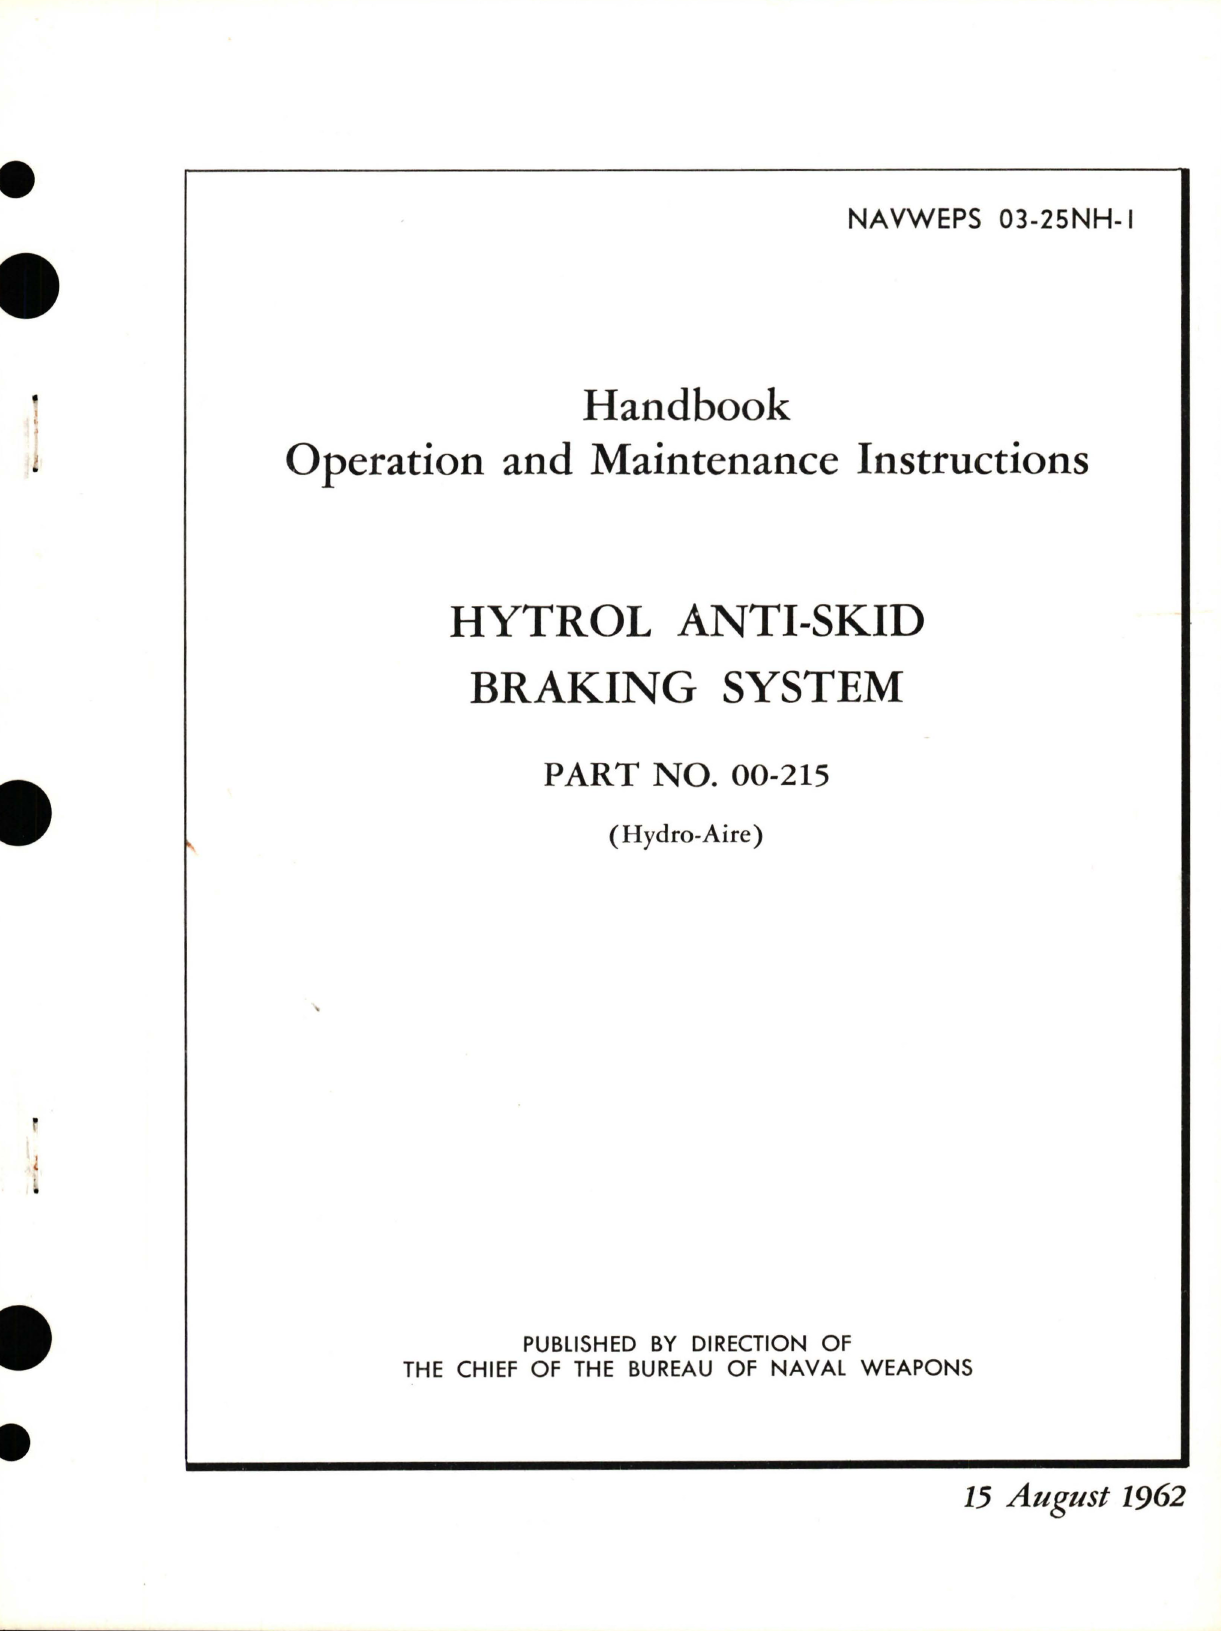 Sample page 1 from AirCorps Library document: Operation and Maintenance Instructions for Hytrol Anti-Skid Braking System - Part 00-215